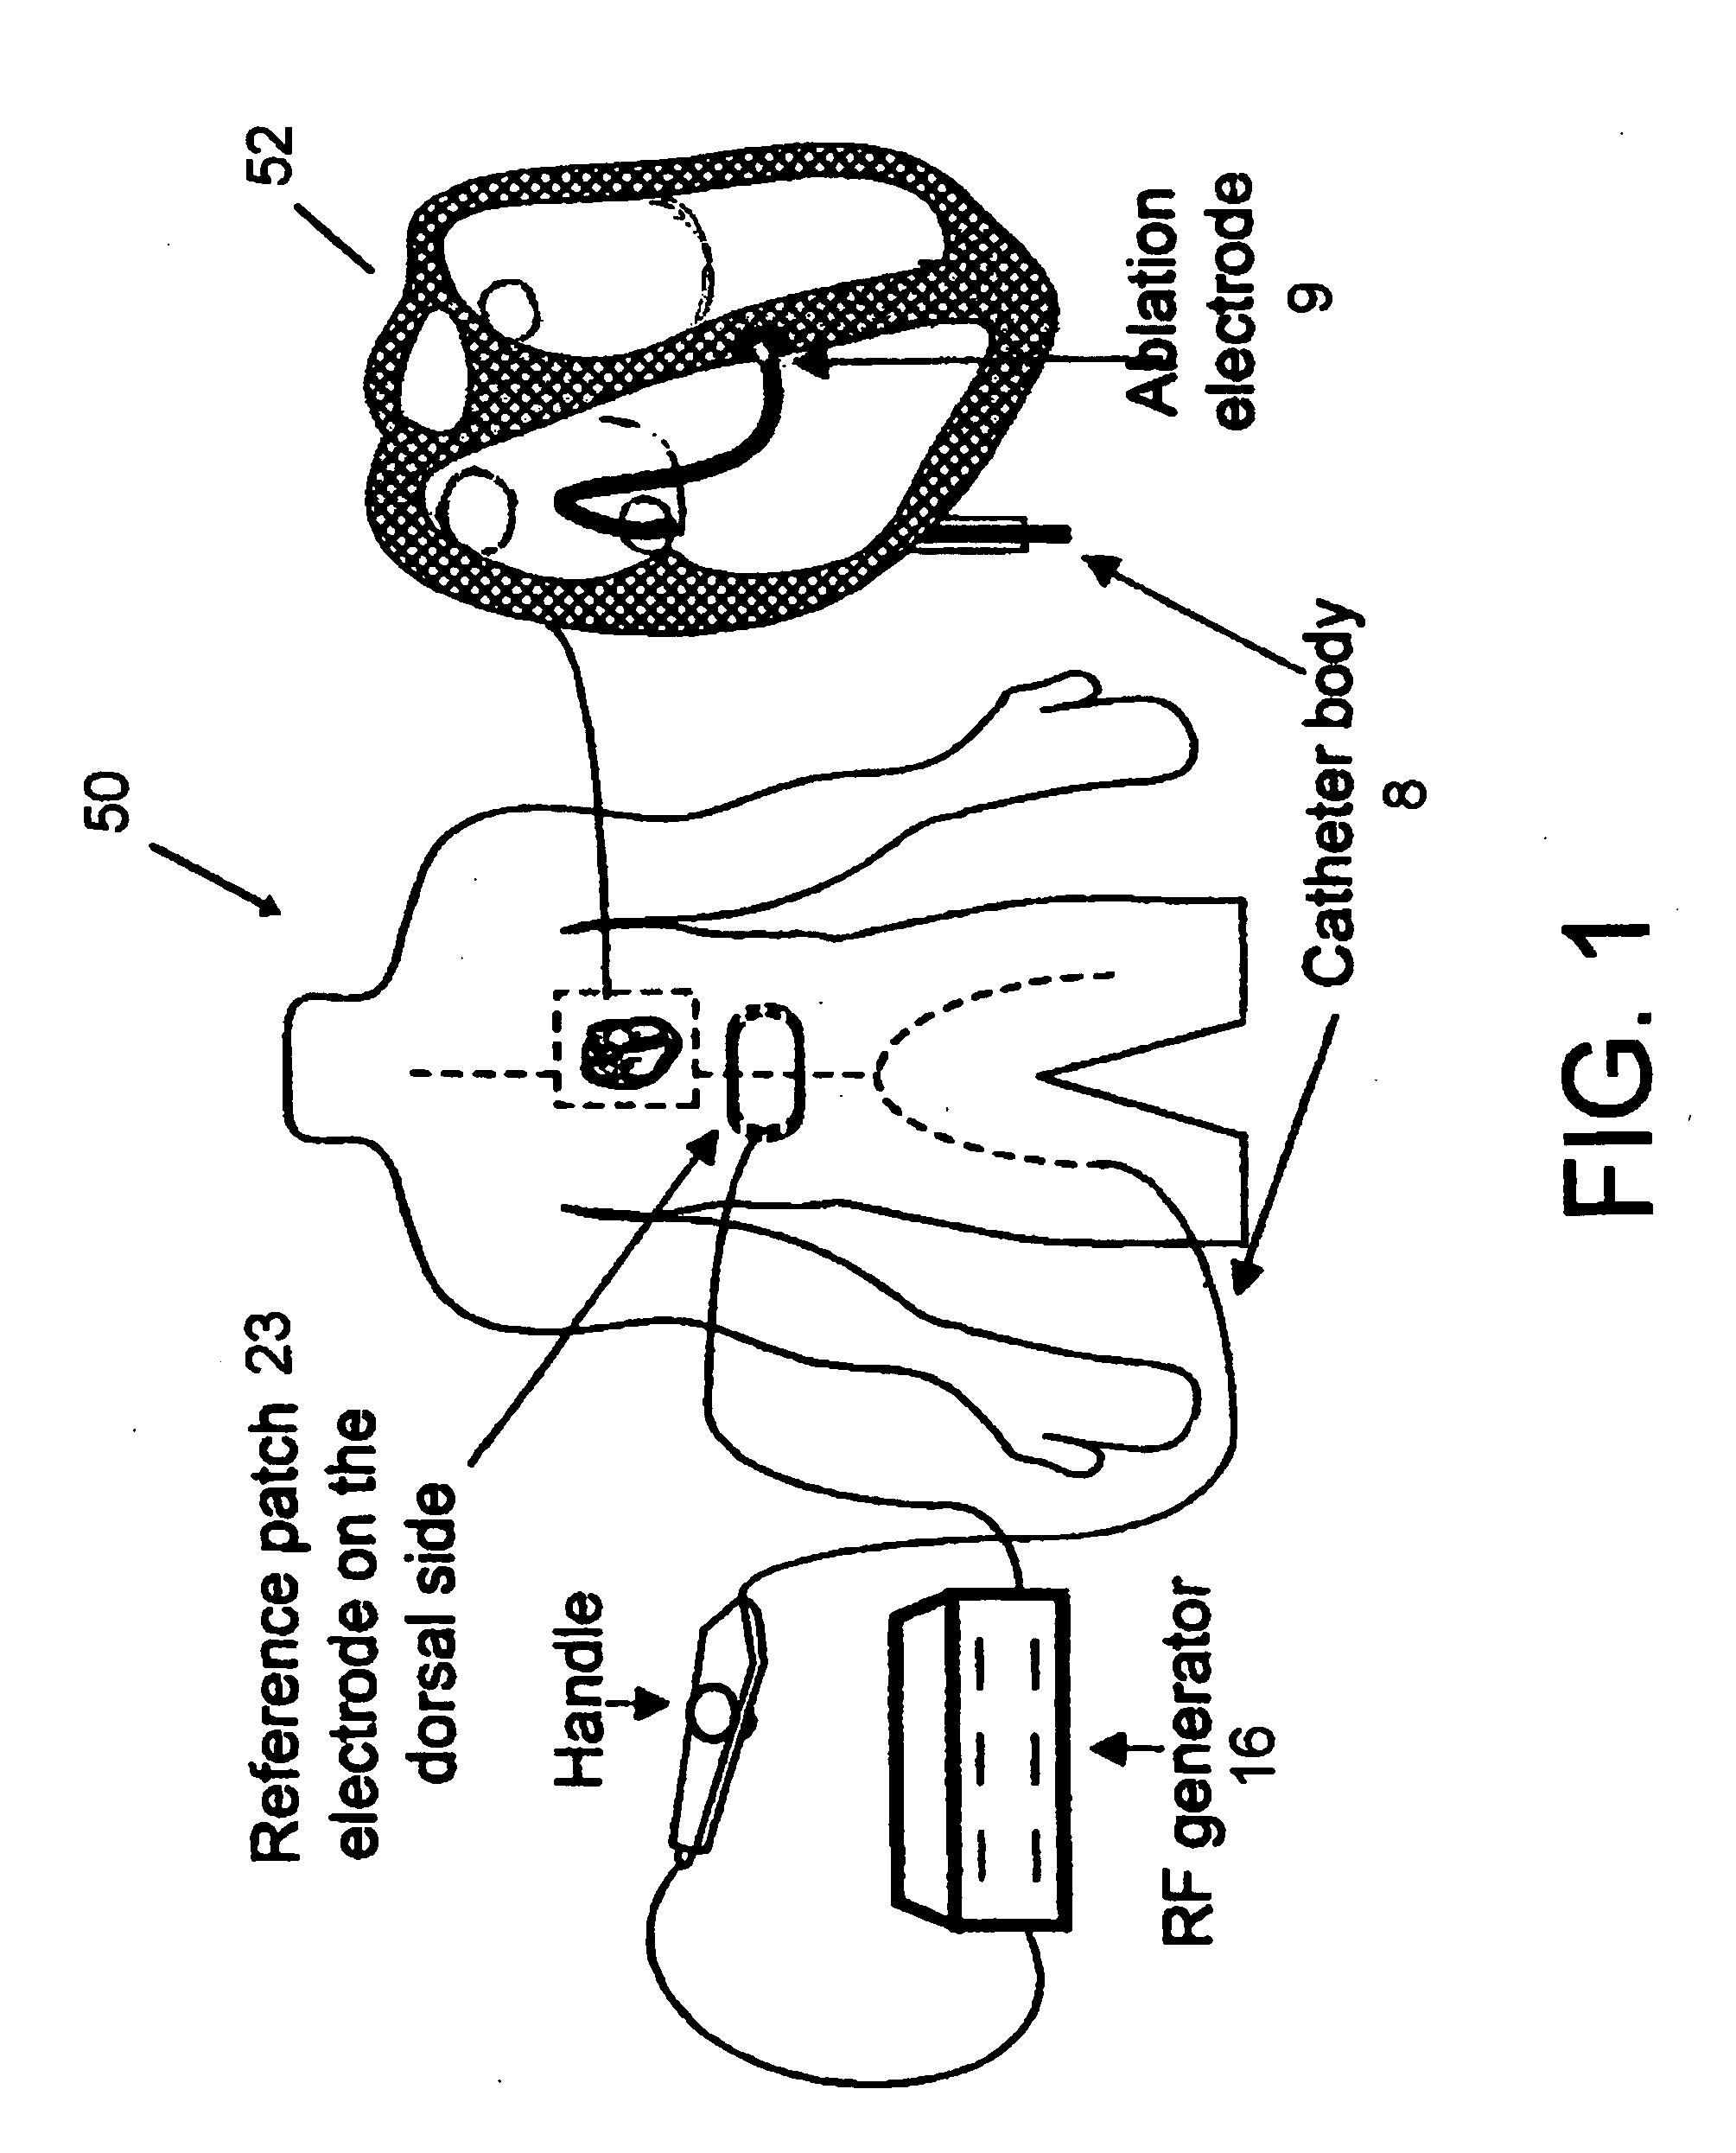 Method and system for monitoring atrial fibrillation ablations with an ablation interface device